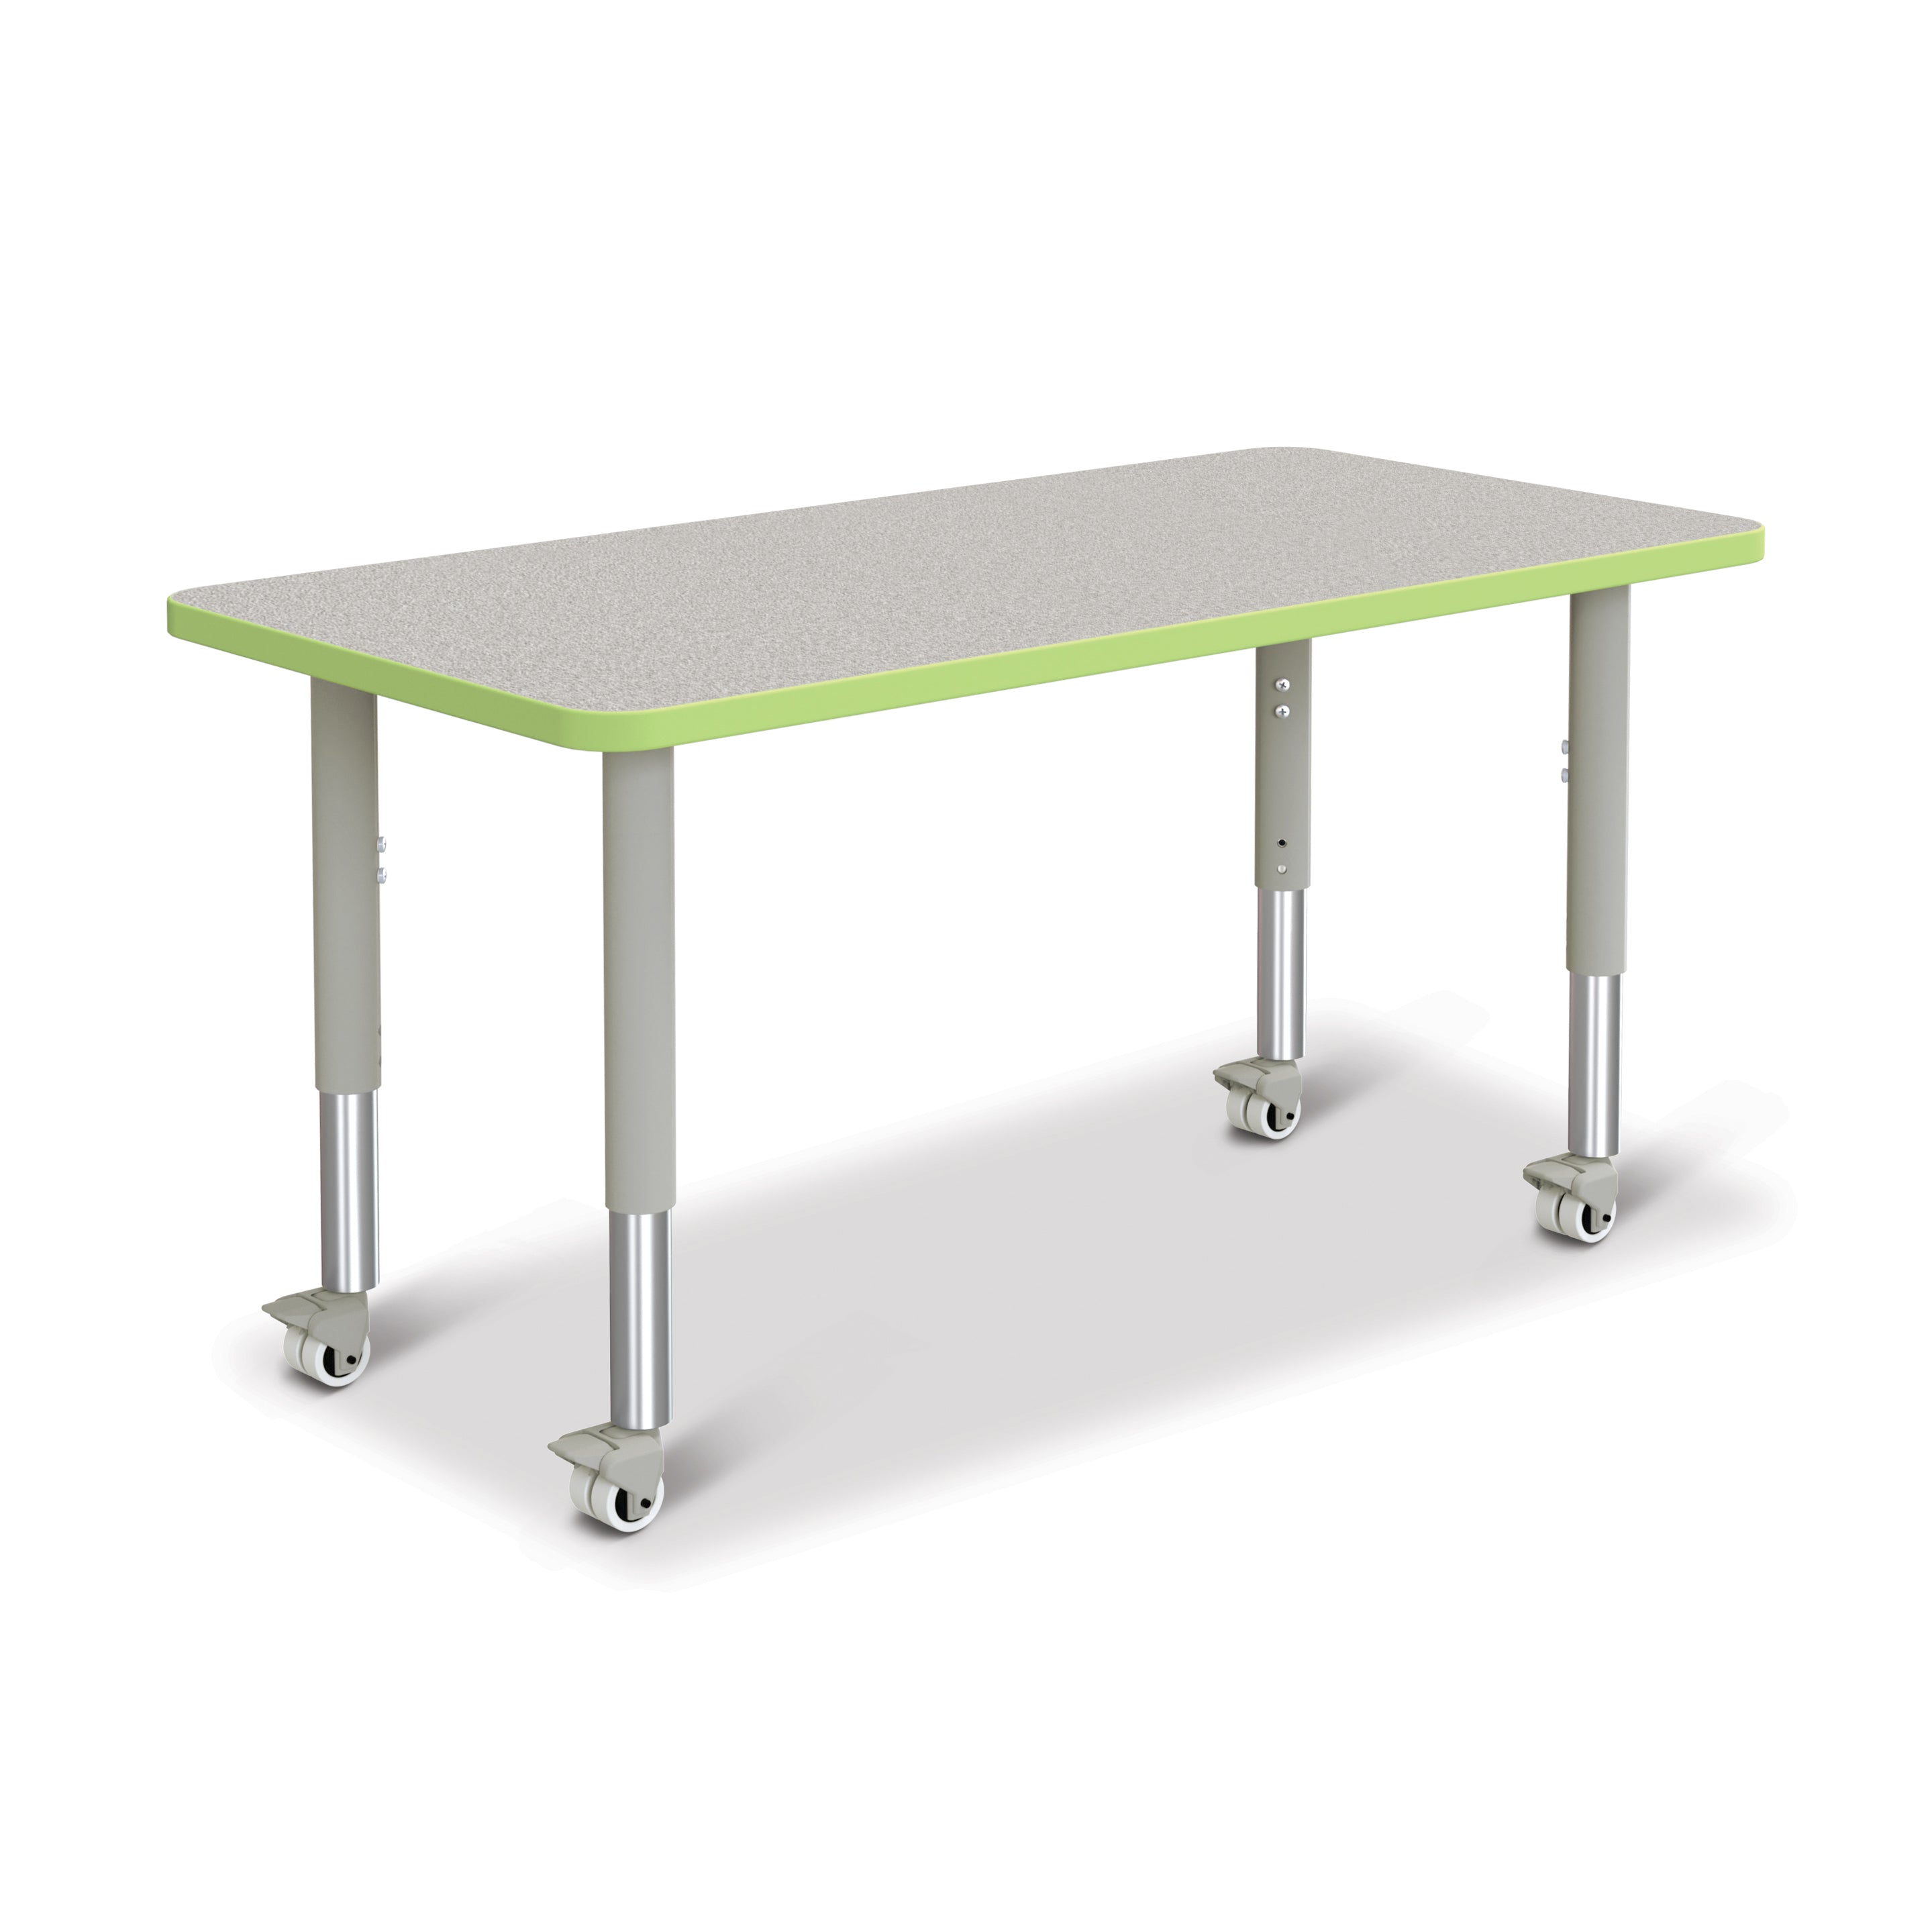 6403JCM130, Berries Rectangle Activity Table - 24" X 48", Mobile - Freckled Gray/Key Lime/Gray